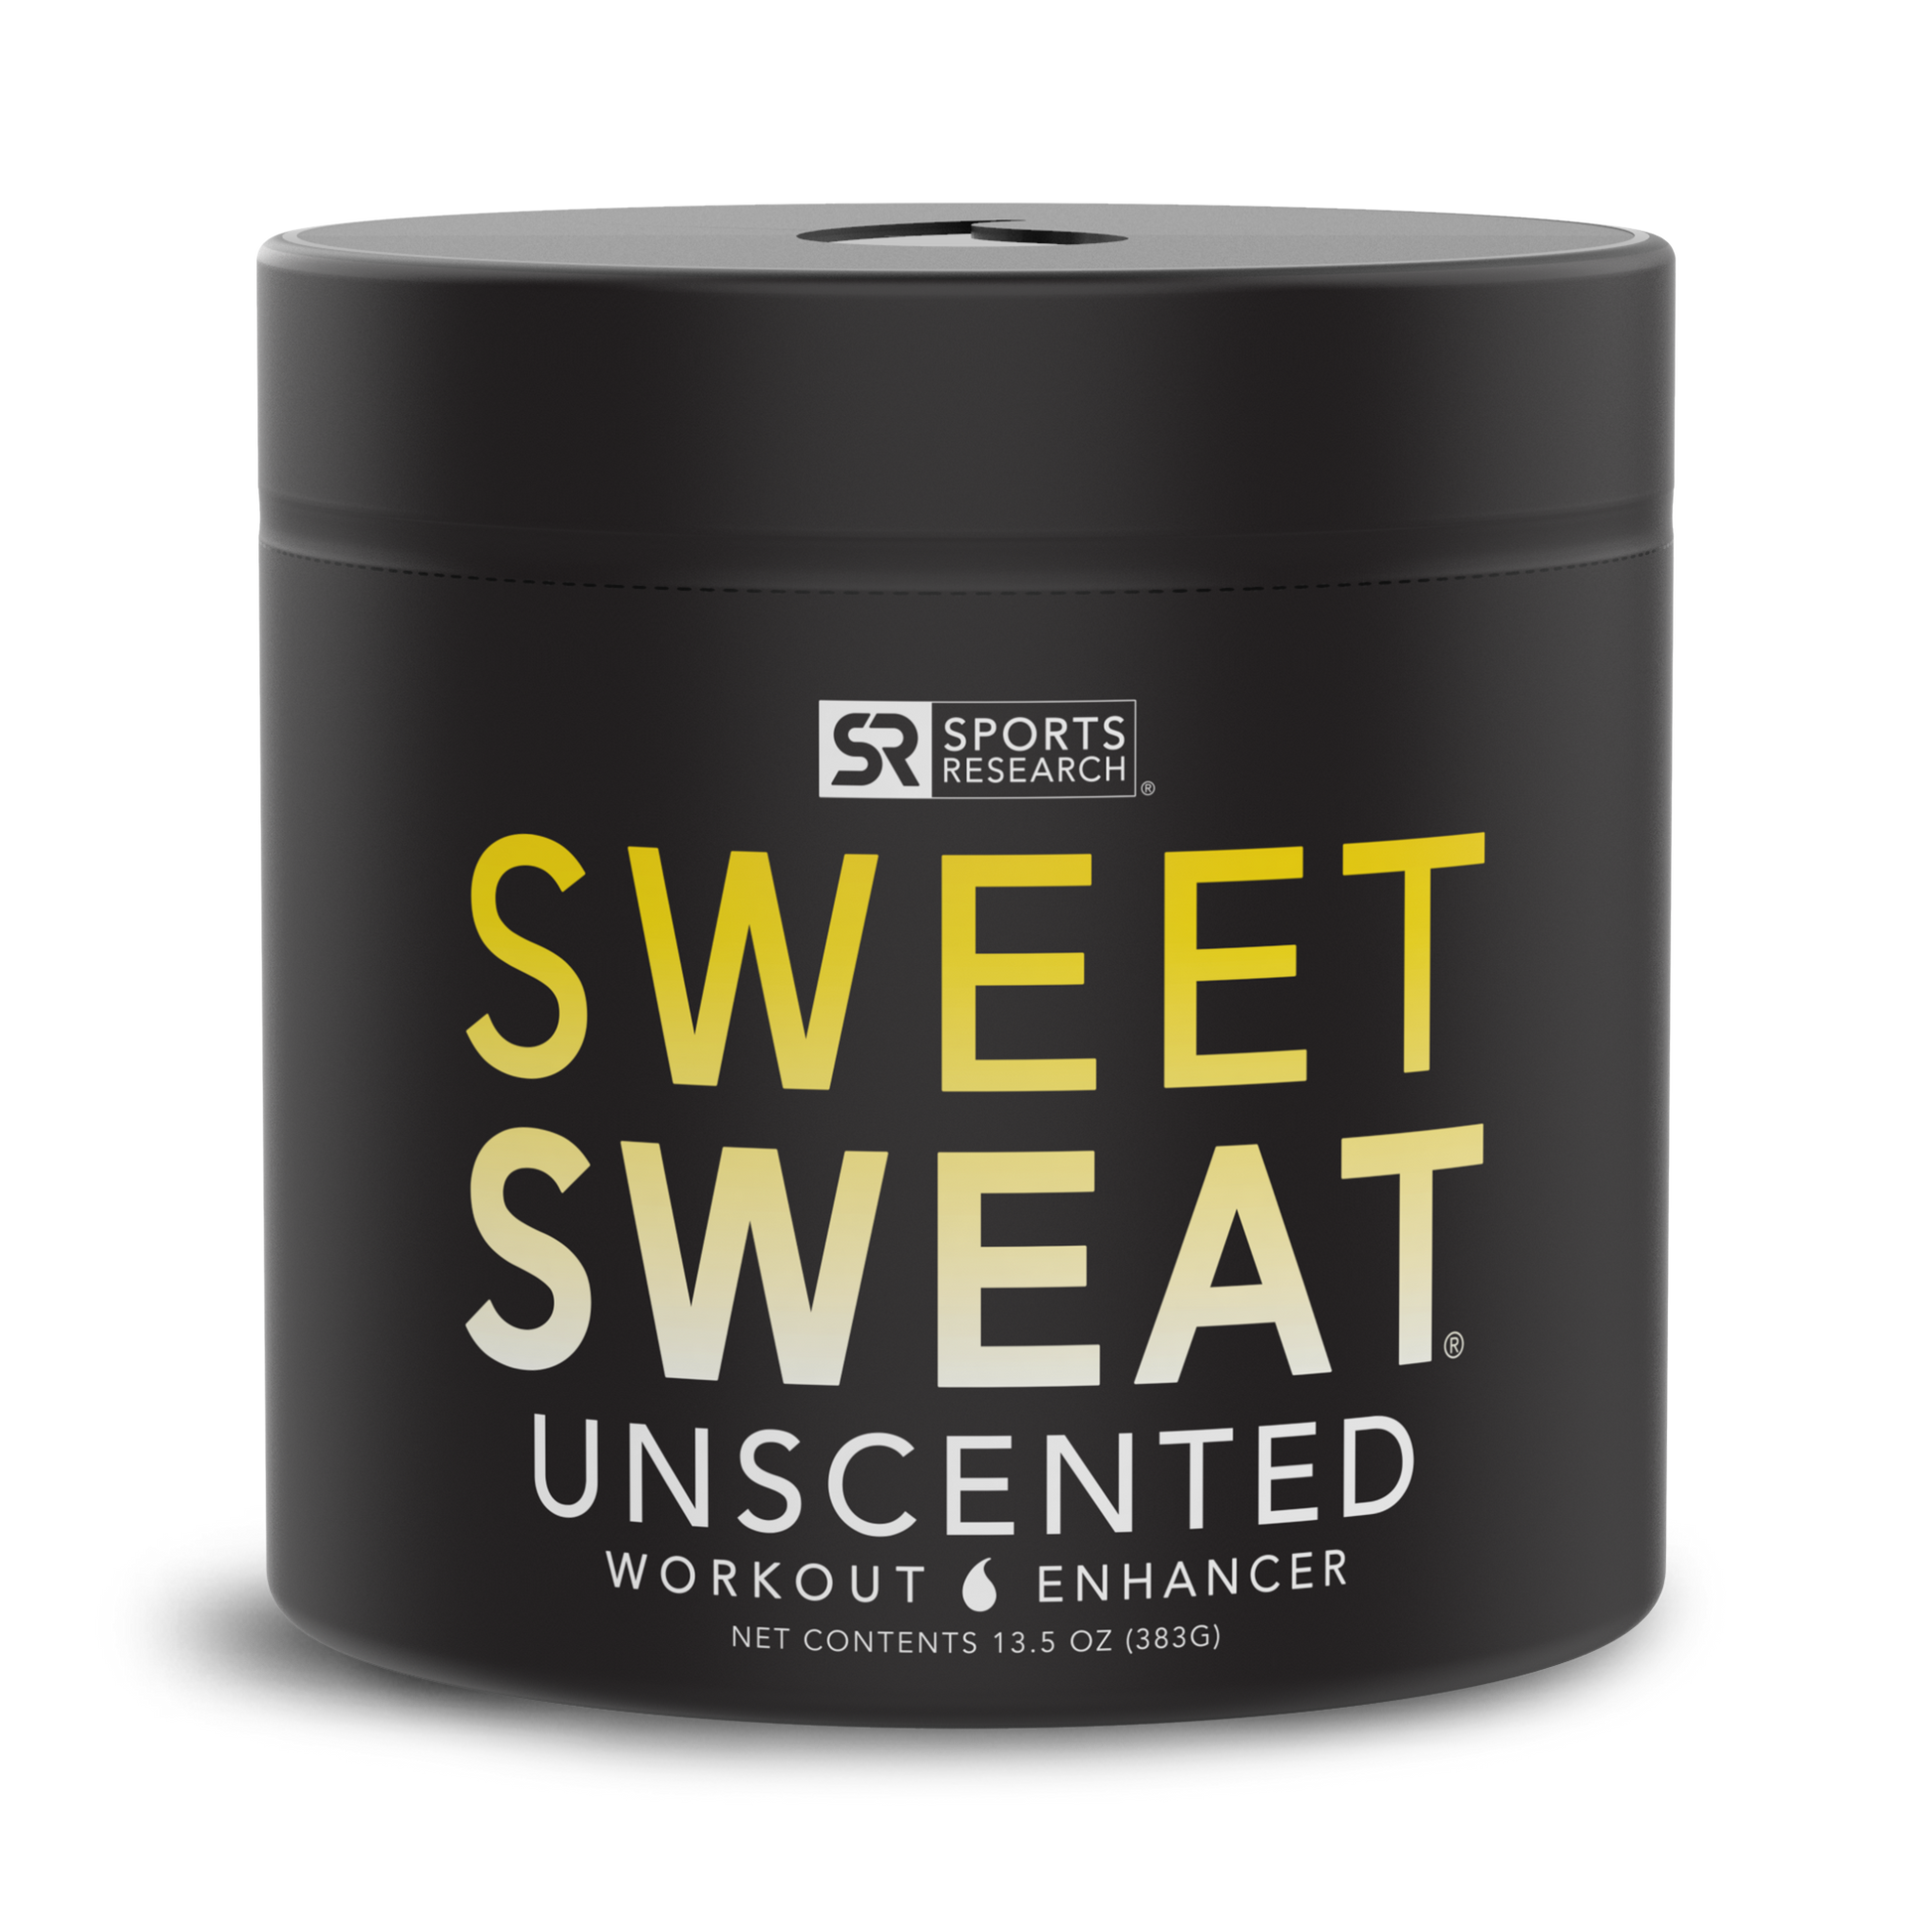 Sweet Sweat® Jar Topical Gel 13.5 oz unscented from the brand Sweet Sweat.